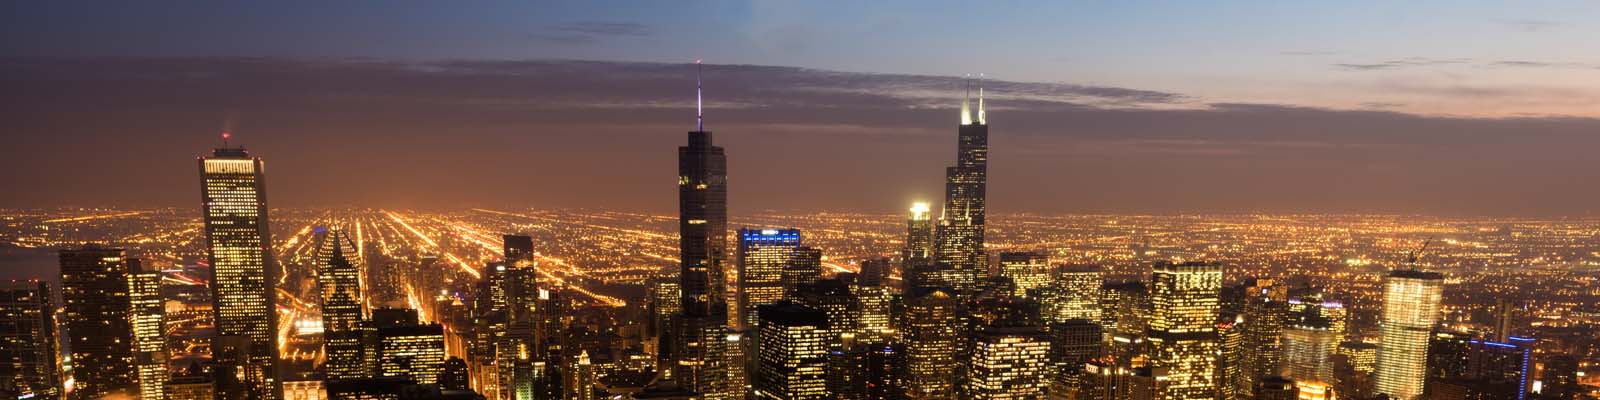 Pictured: A cityscape of Chicago, Illinois.